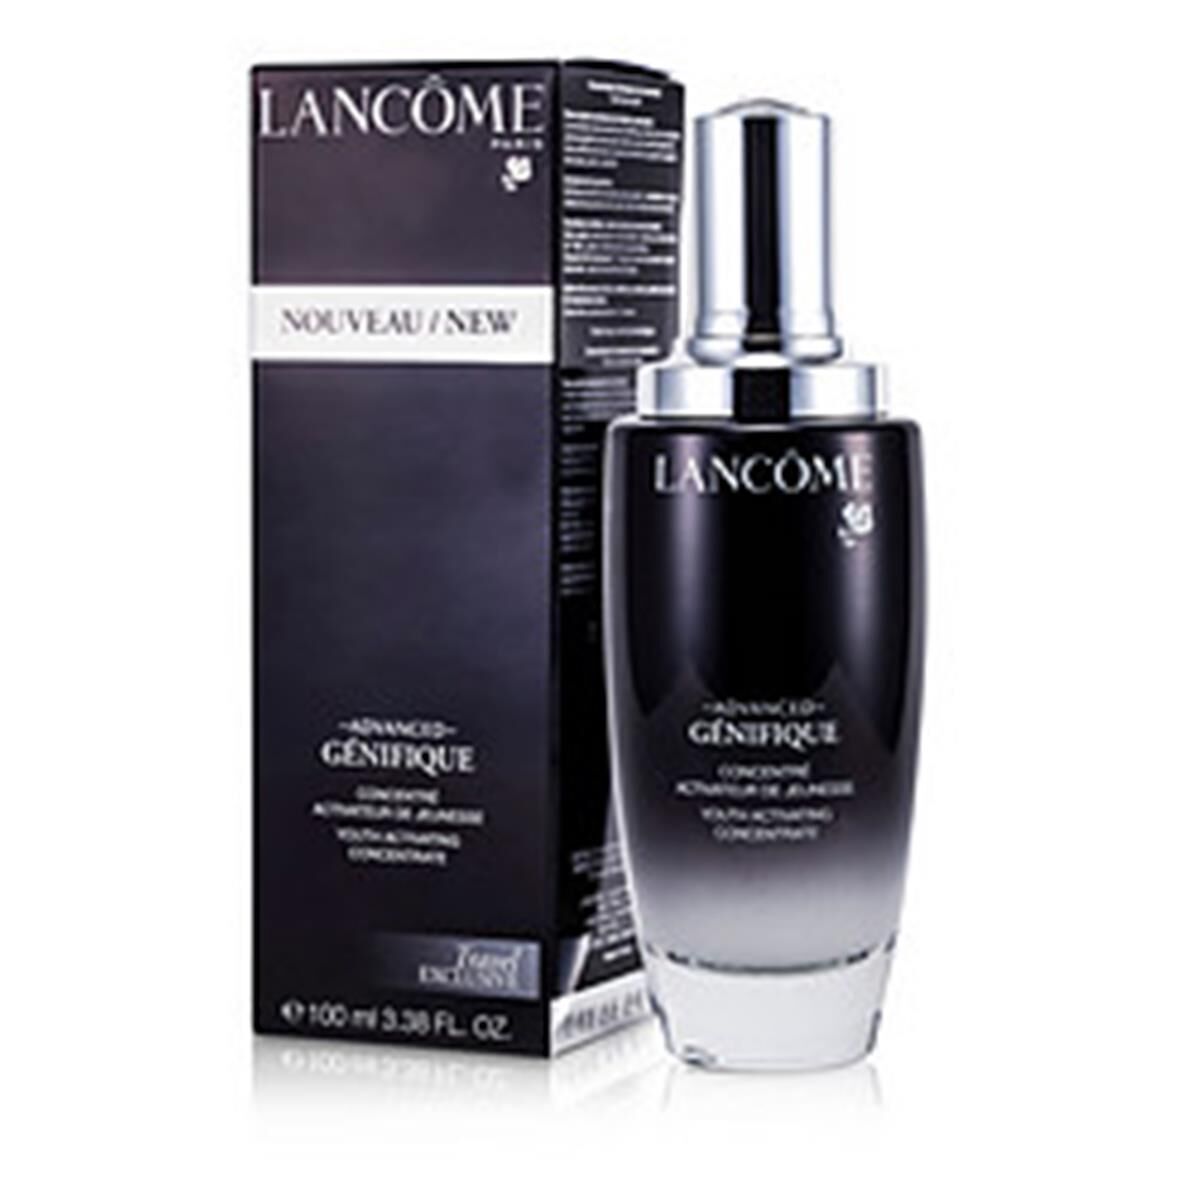 Lancome 254406 3.38 oz Genifique Advanced Youth Activating Concentrate One Size